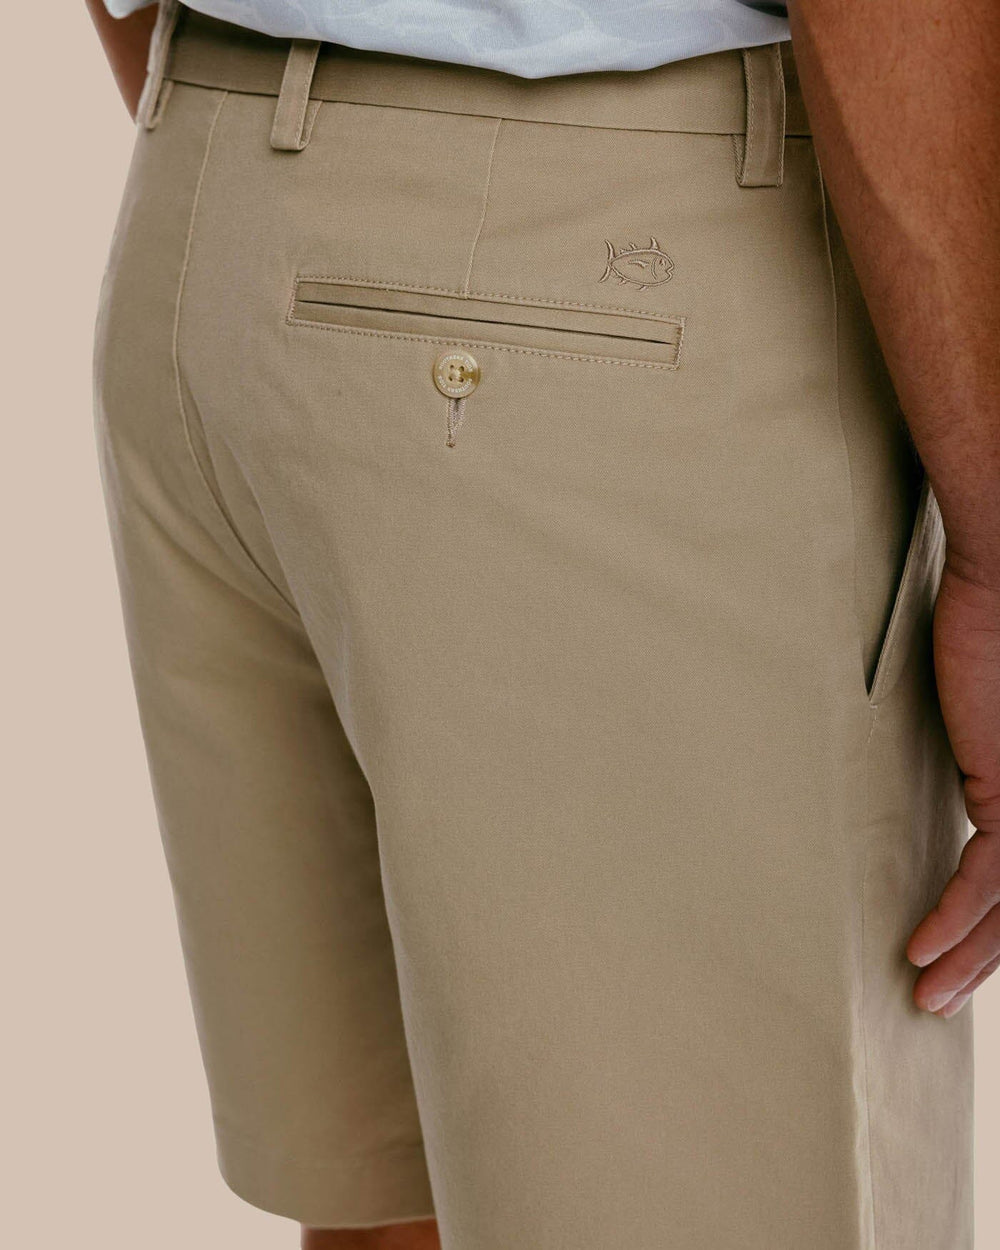 The pocket view of the Men's New Channel Marker 9 Inch Short by Southern Tide - Sandstone Khaki